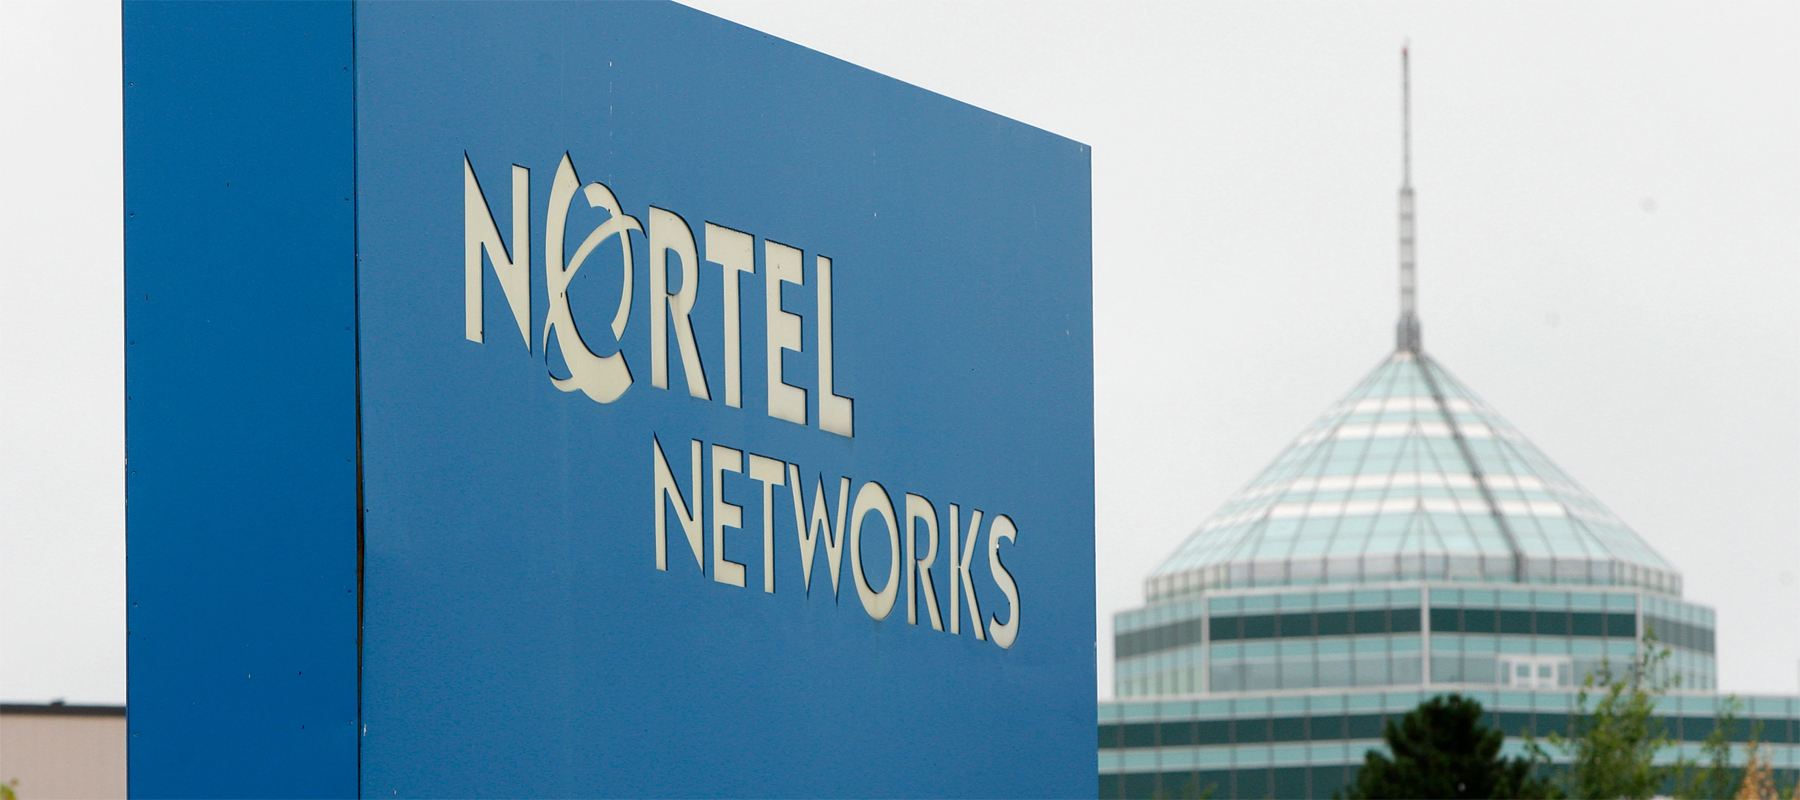 Old Nortel Network Logo on a Building